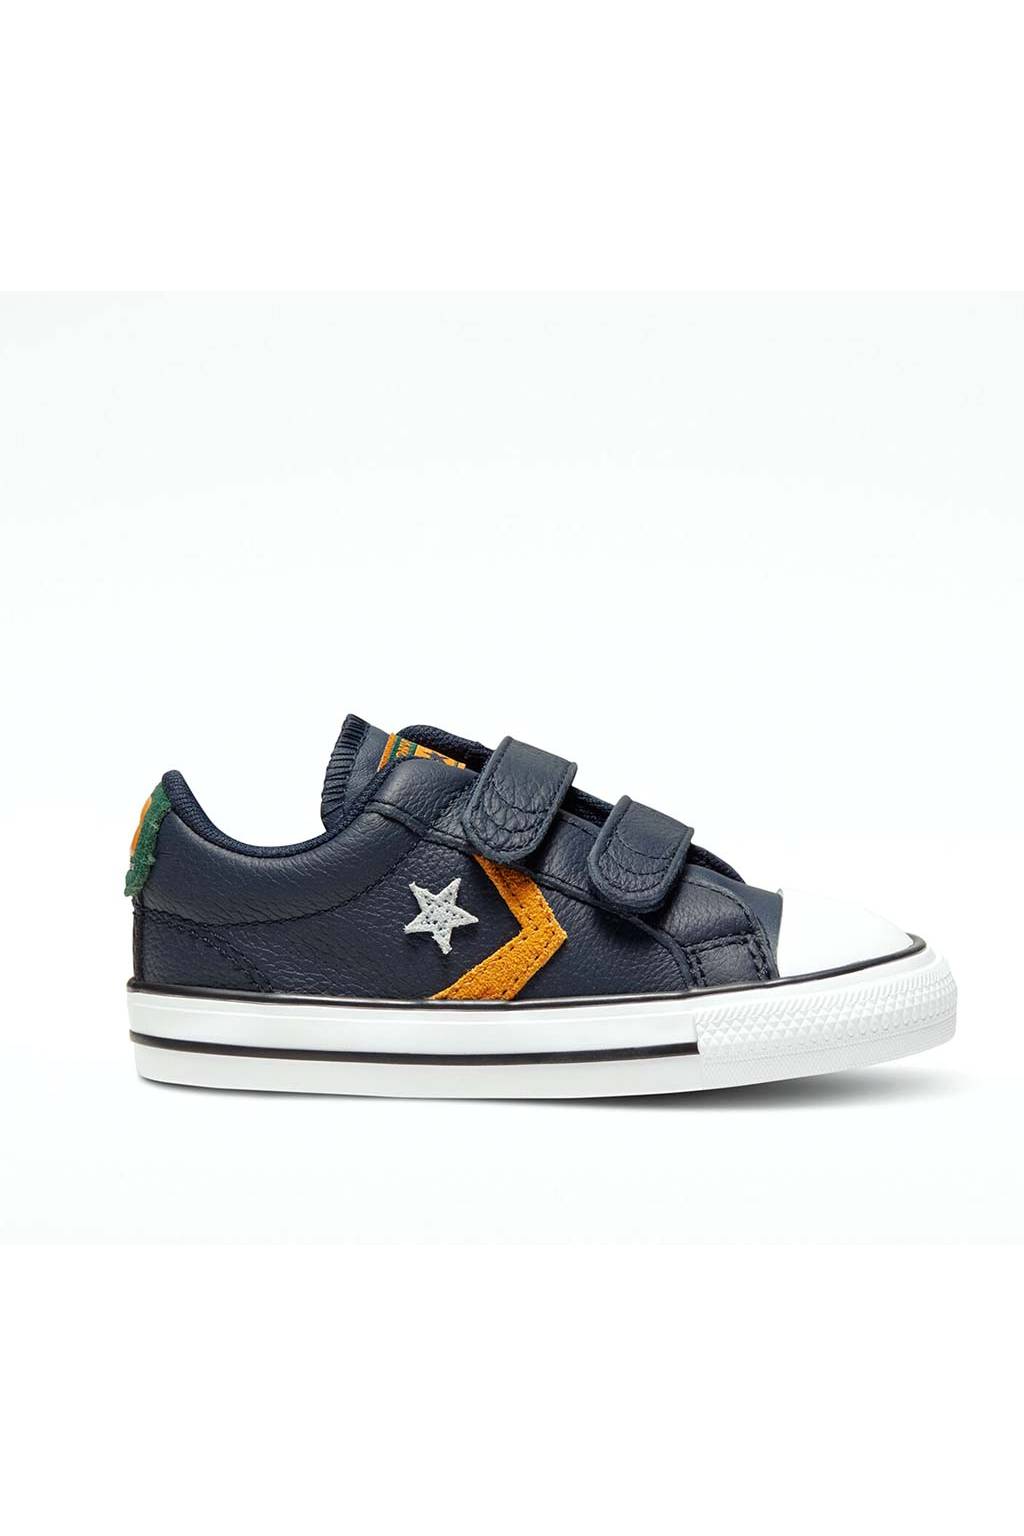 Converse Player 2V OX Leather 768429C -